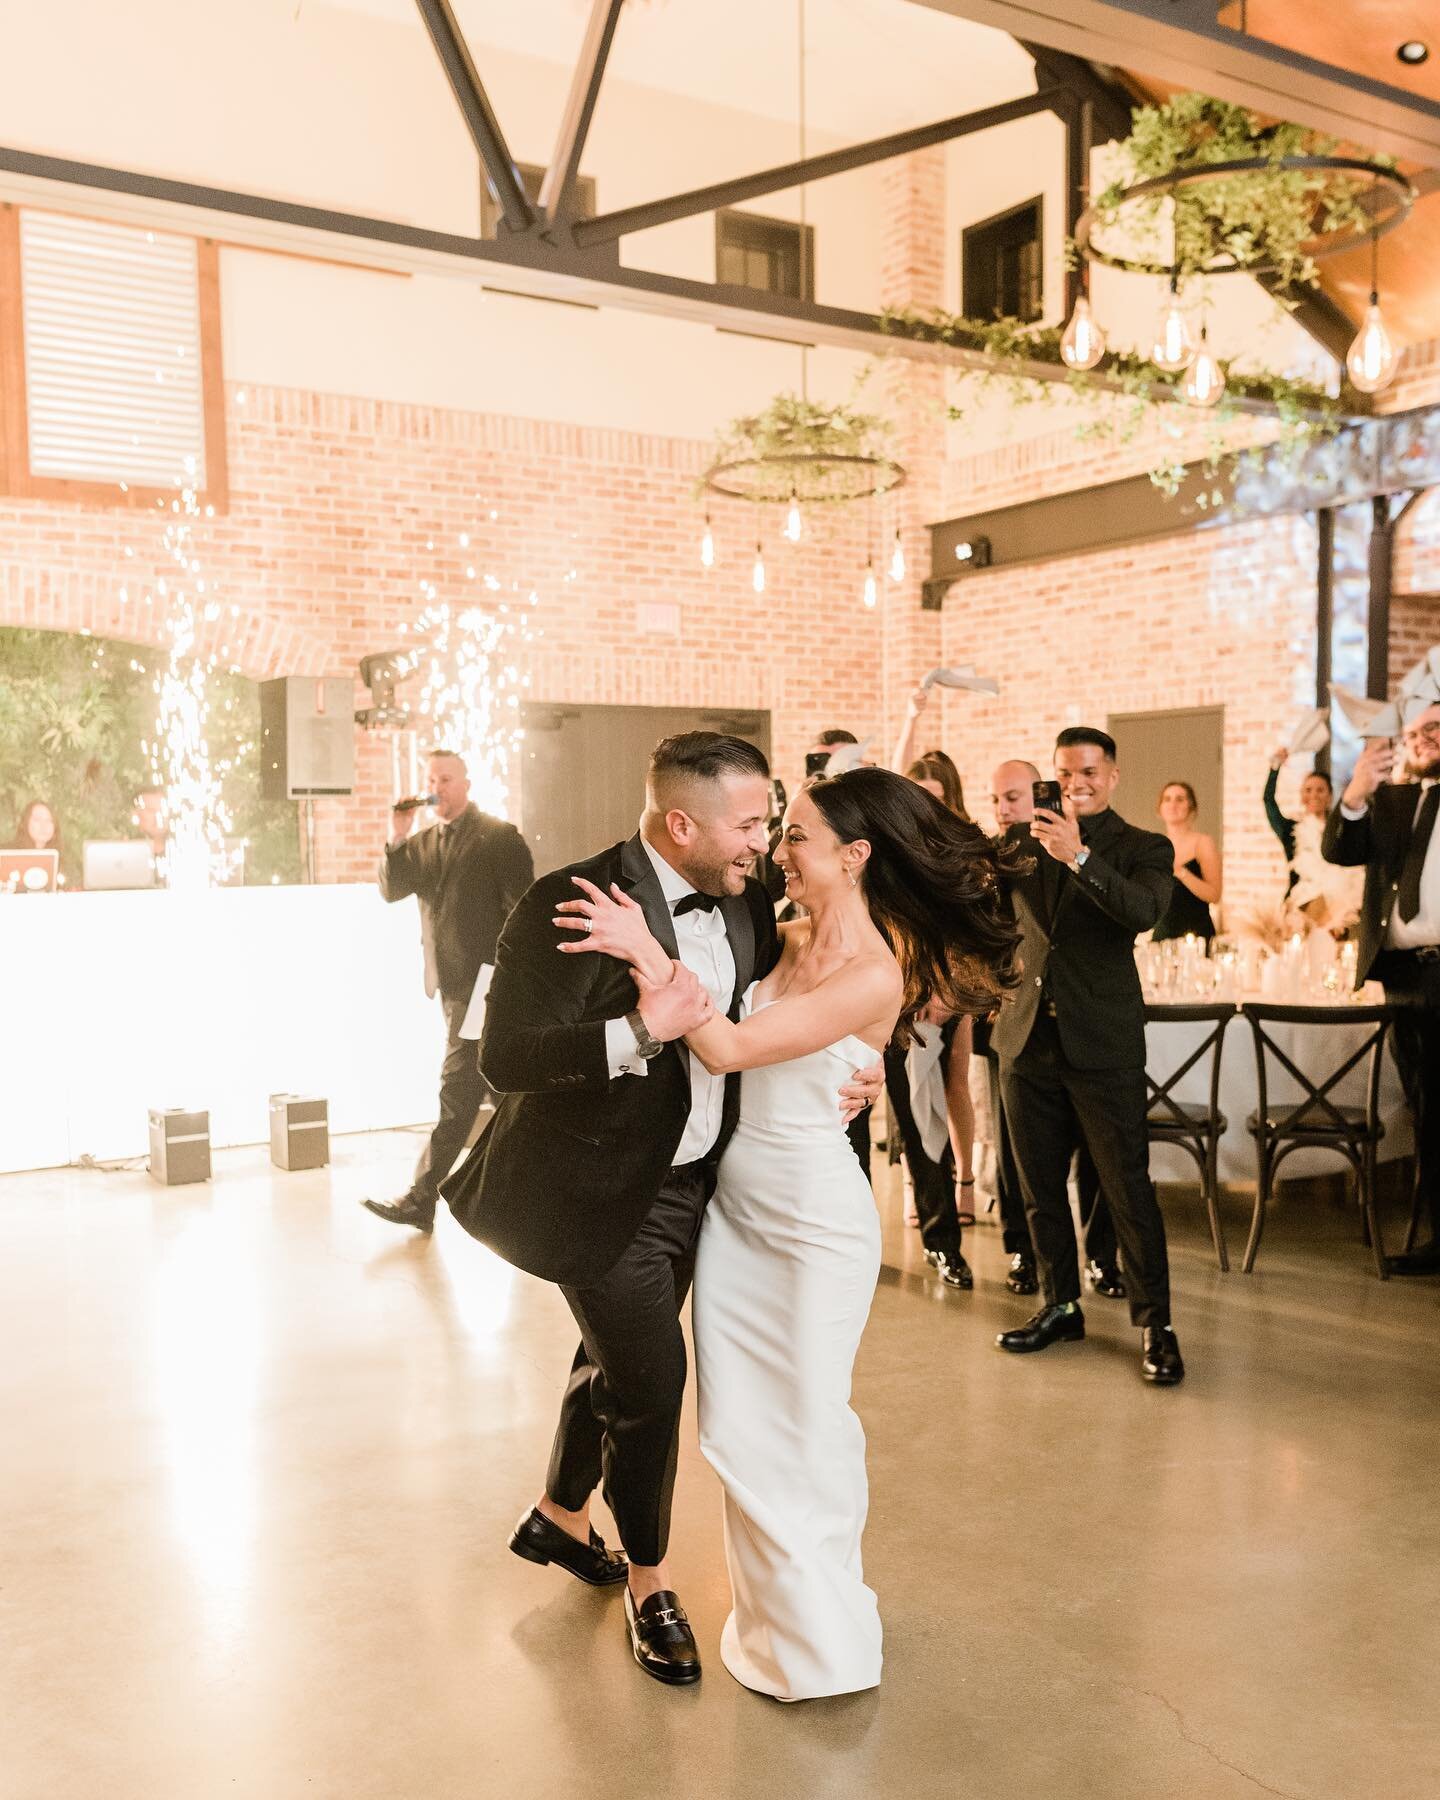 Your wedding date really puts into perspective just how fast time really moves. I can&rsquo;t believe this moment was 6 months ago. Either way, pure bliss. Love you Lady Ledg&hellip;
.
.
.
.
Also, shout-out the cameo @dquiznj + @kevin_merkle 😎
.
.
.